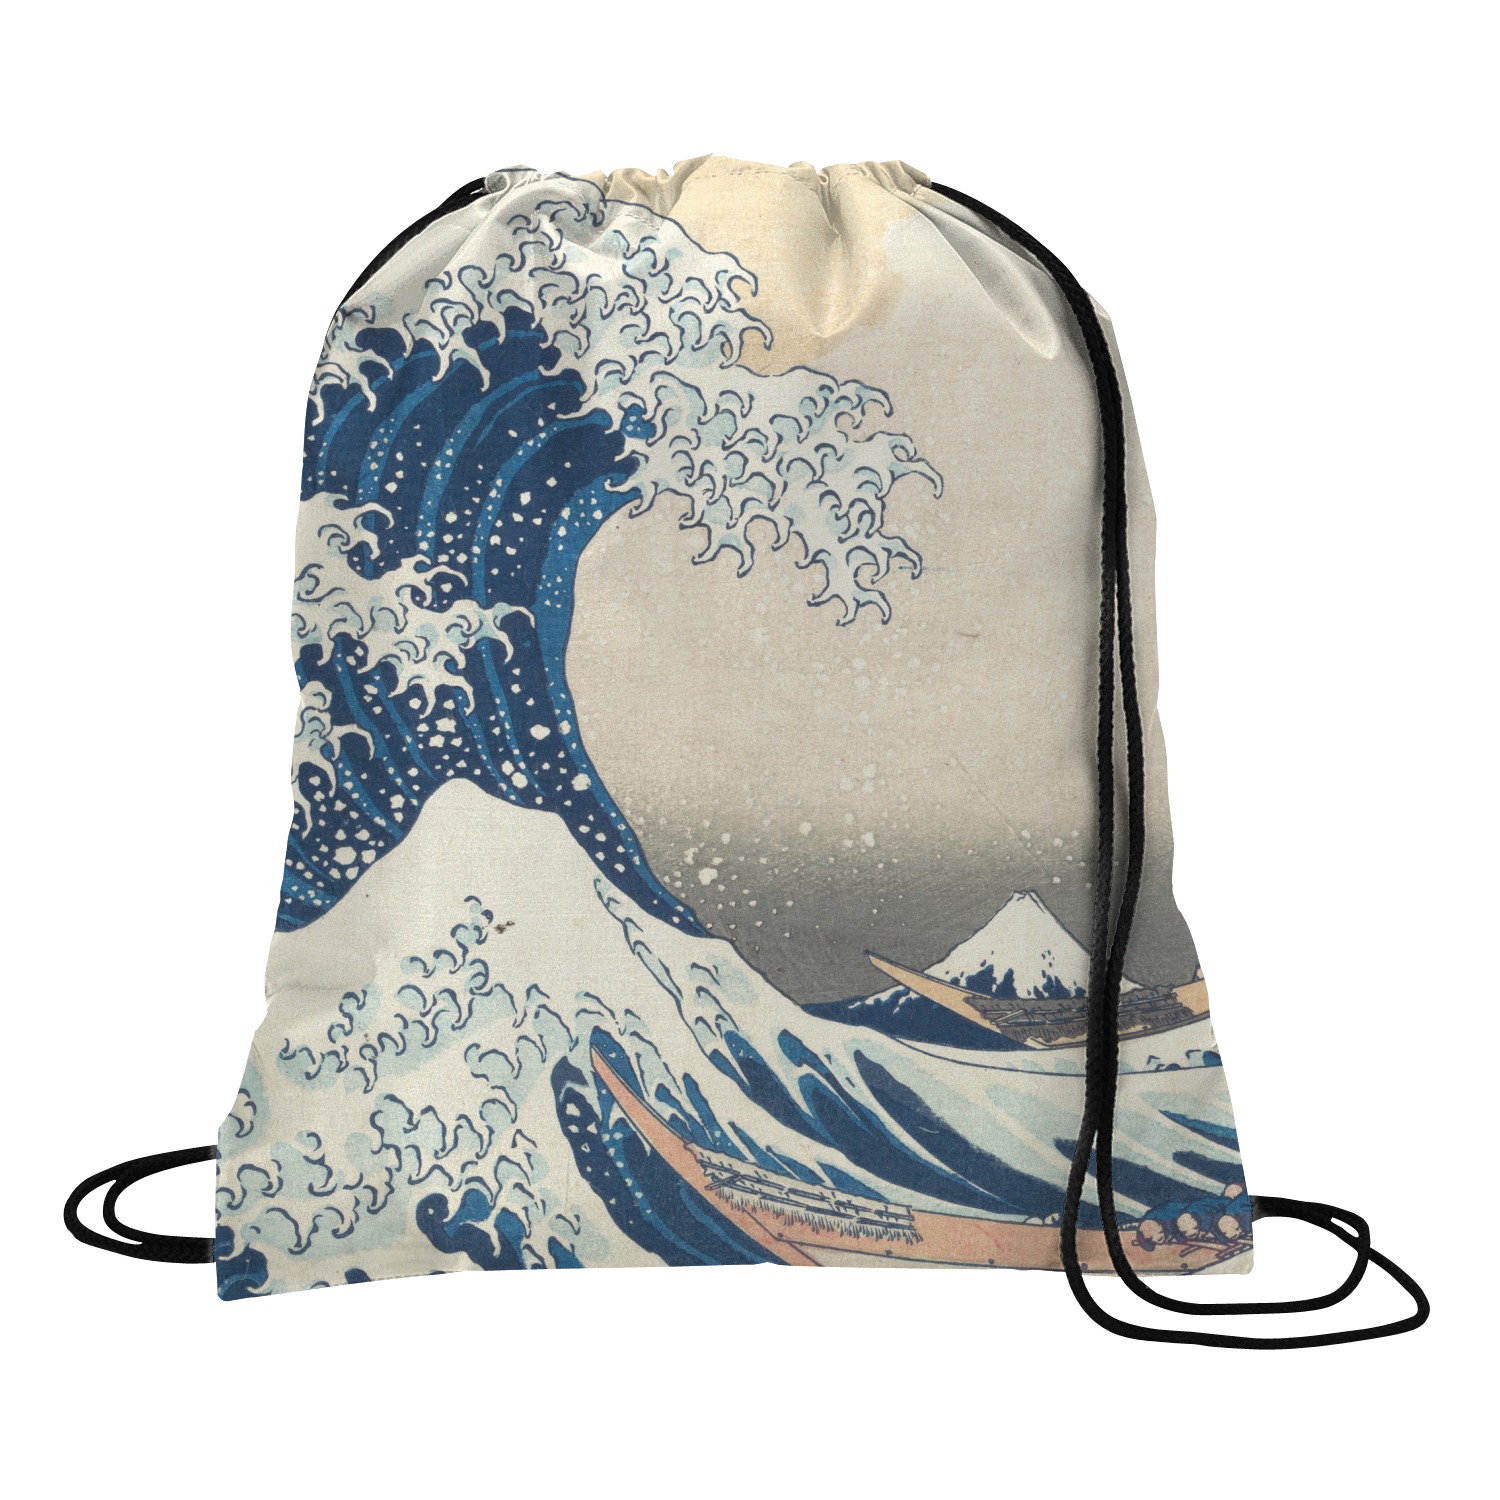 Drawstring Bags For Men Japan Giant Wave Art Motif Bag Backpack Drawstring Backpack Lightweight With Zipper Pocket Sports Athletic School Travel Gym Cinch Sack